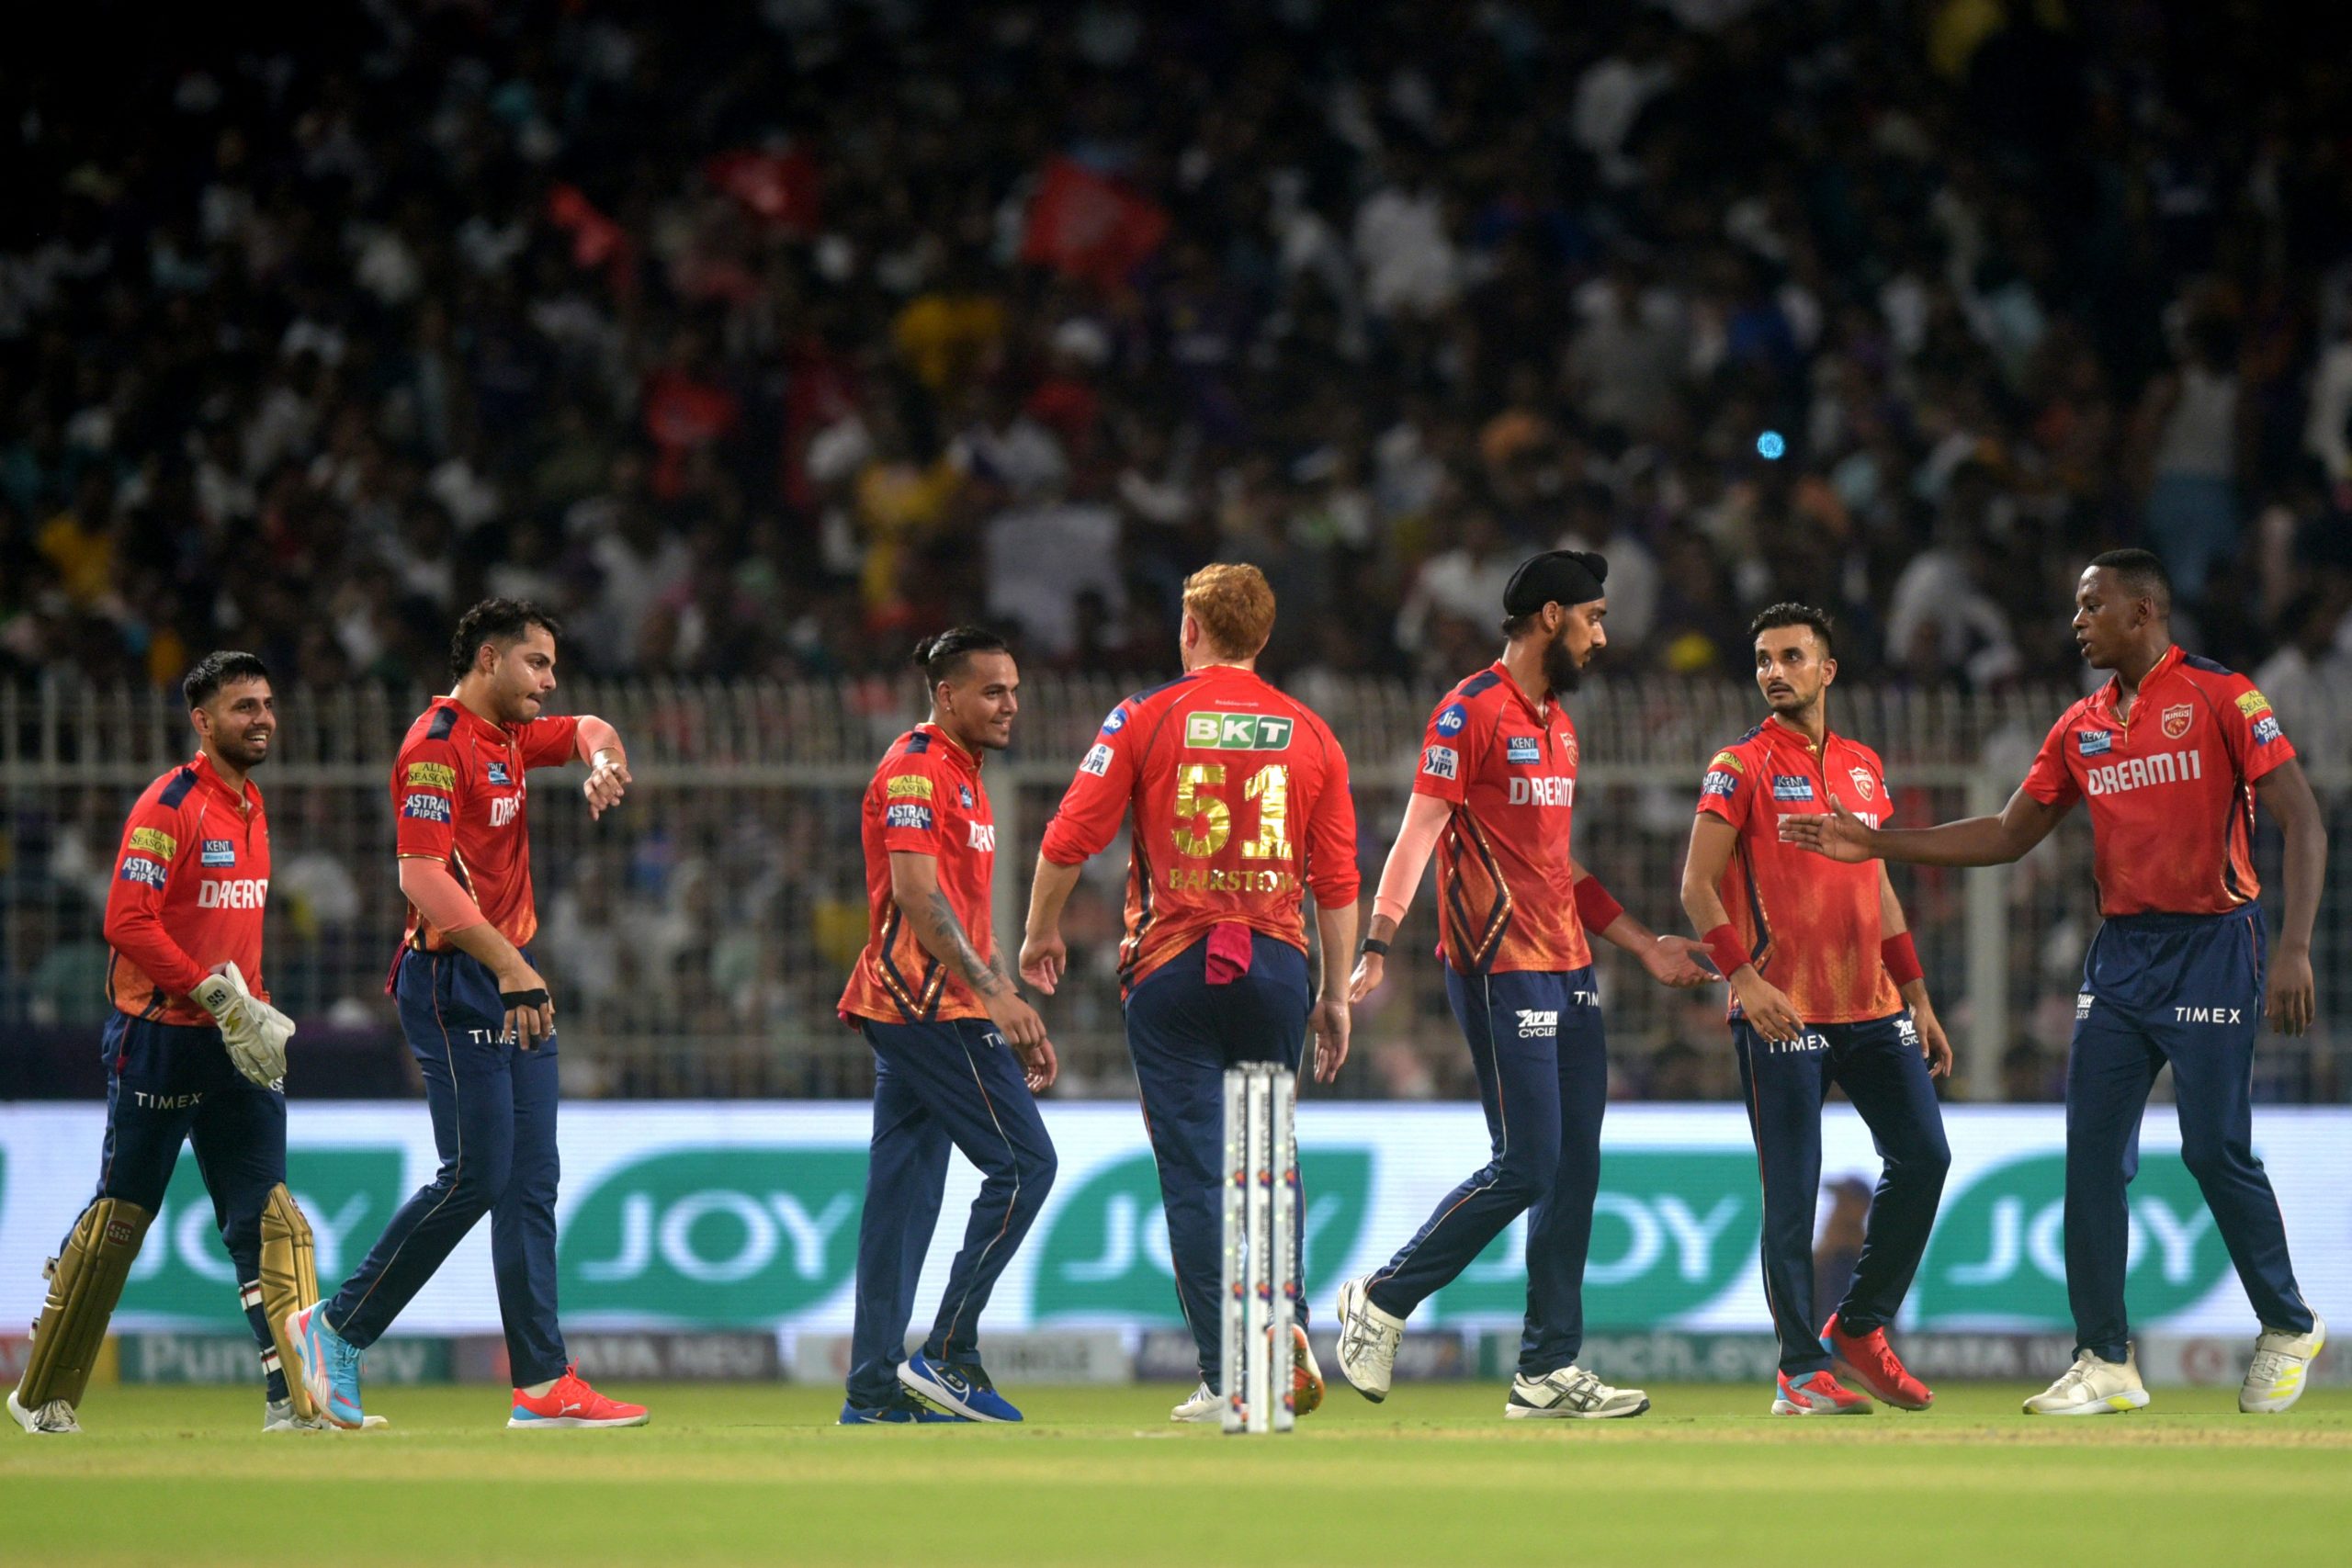 Punjab Kings' players on the pitch